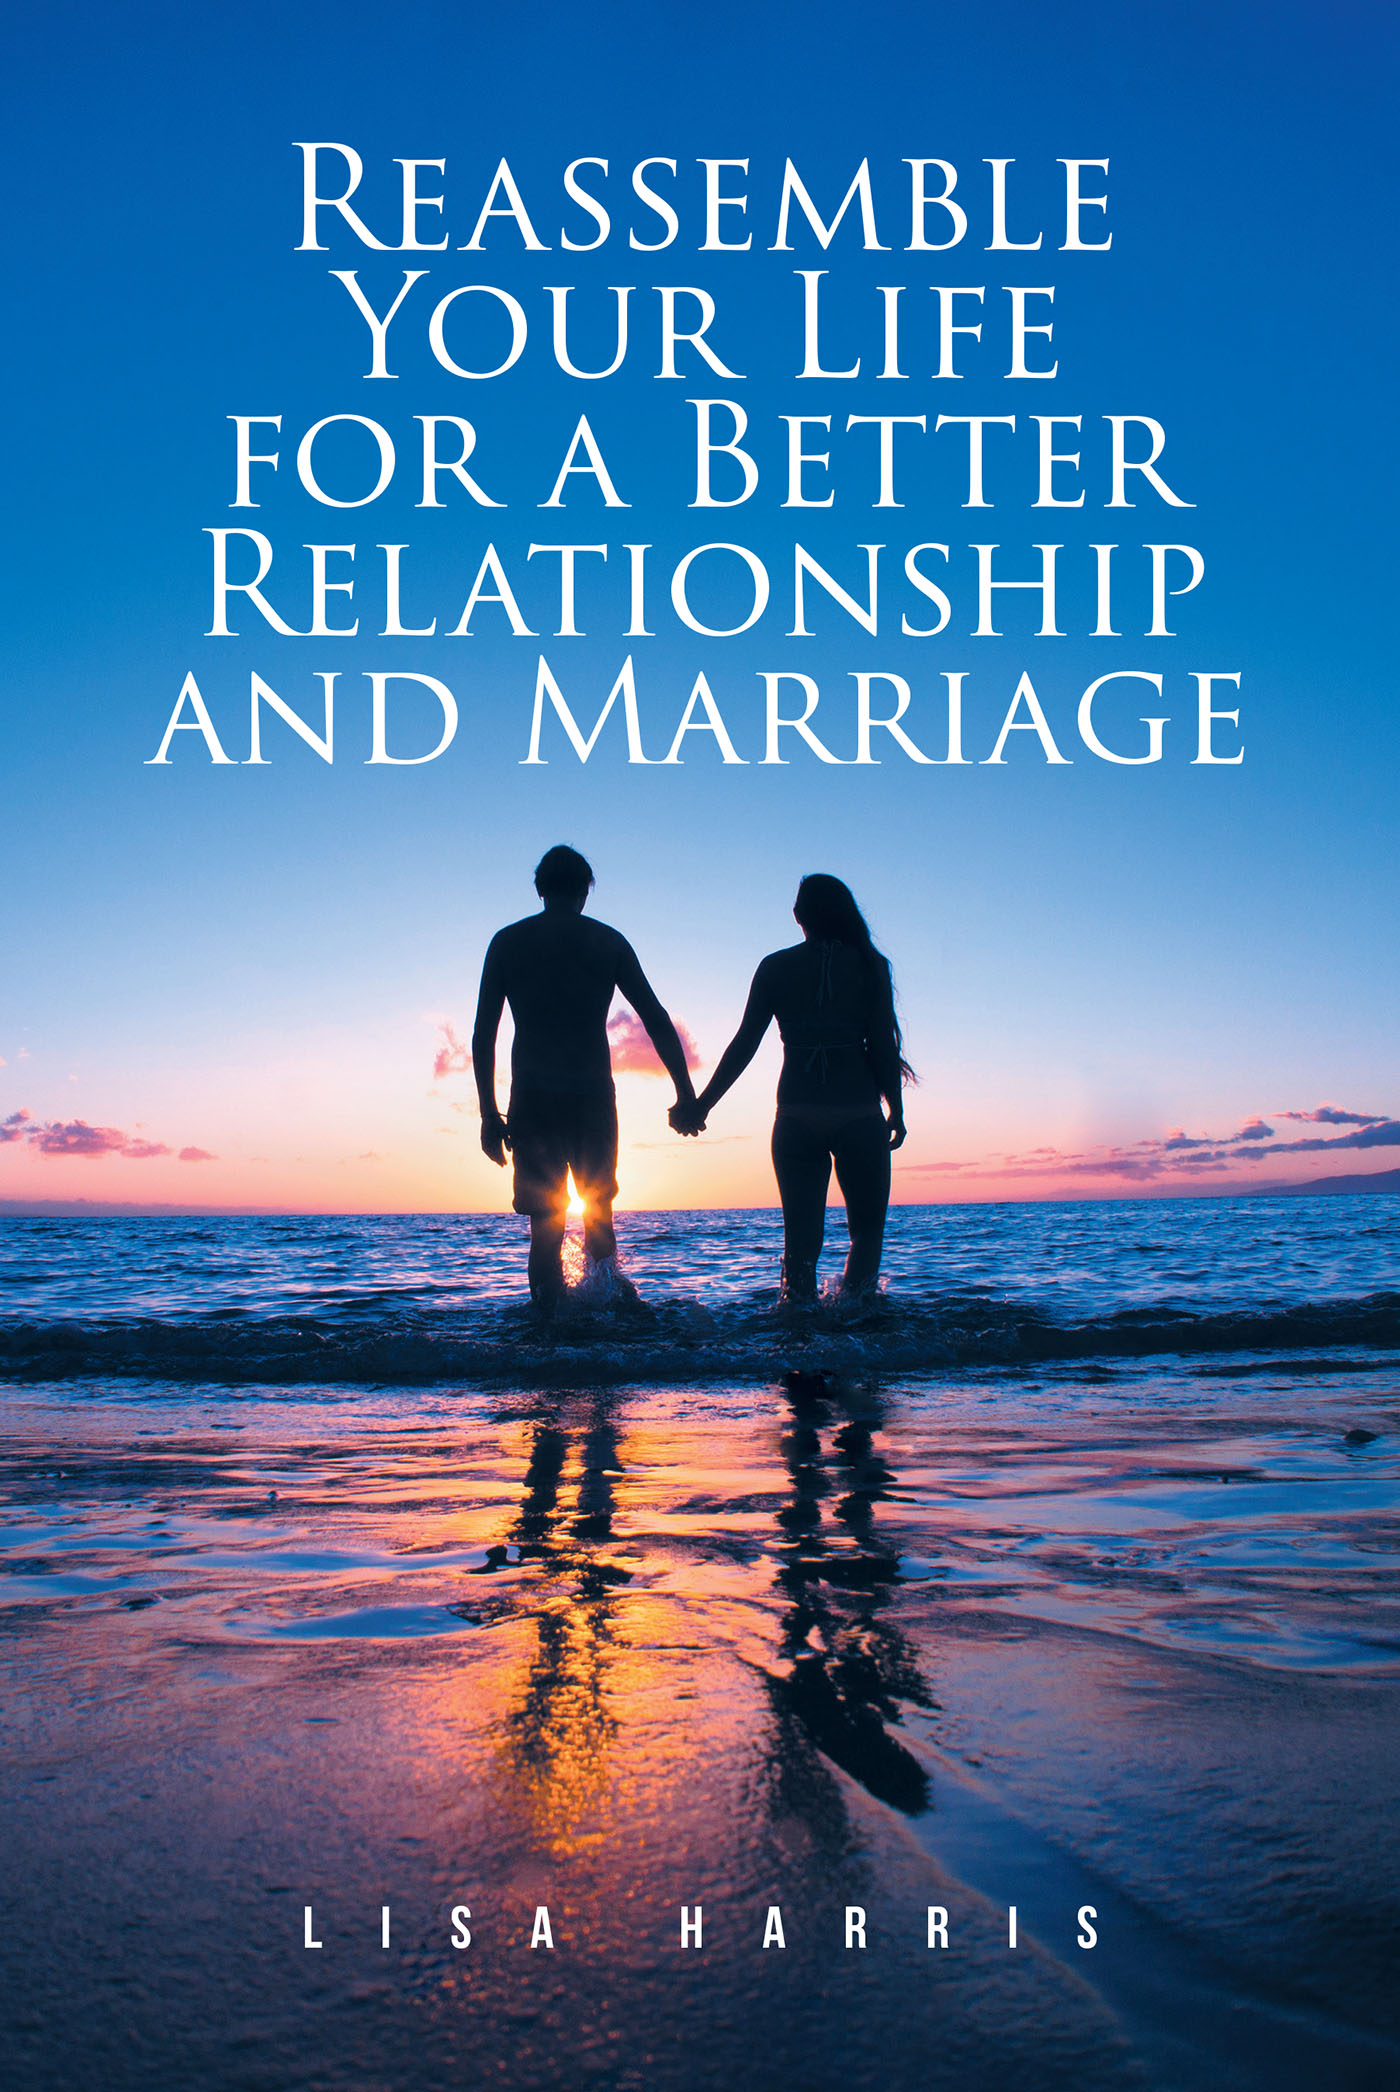 Lisa Harris’s Newly Released "Reassemble Your Life for a Better Relationship and Marriage" is an Uplifting Message of Encouragement for All